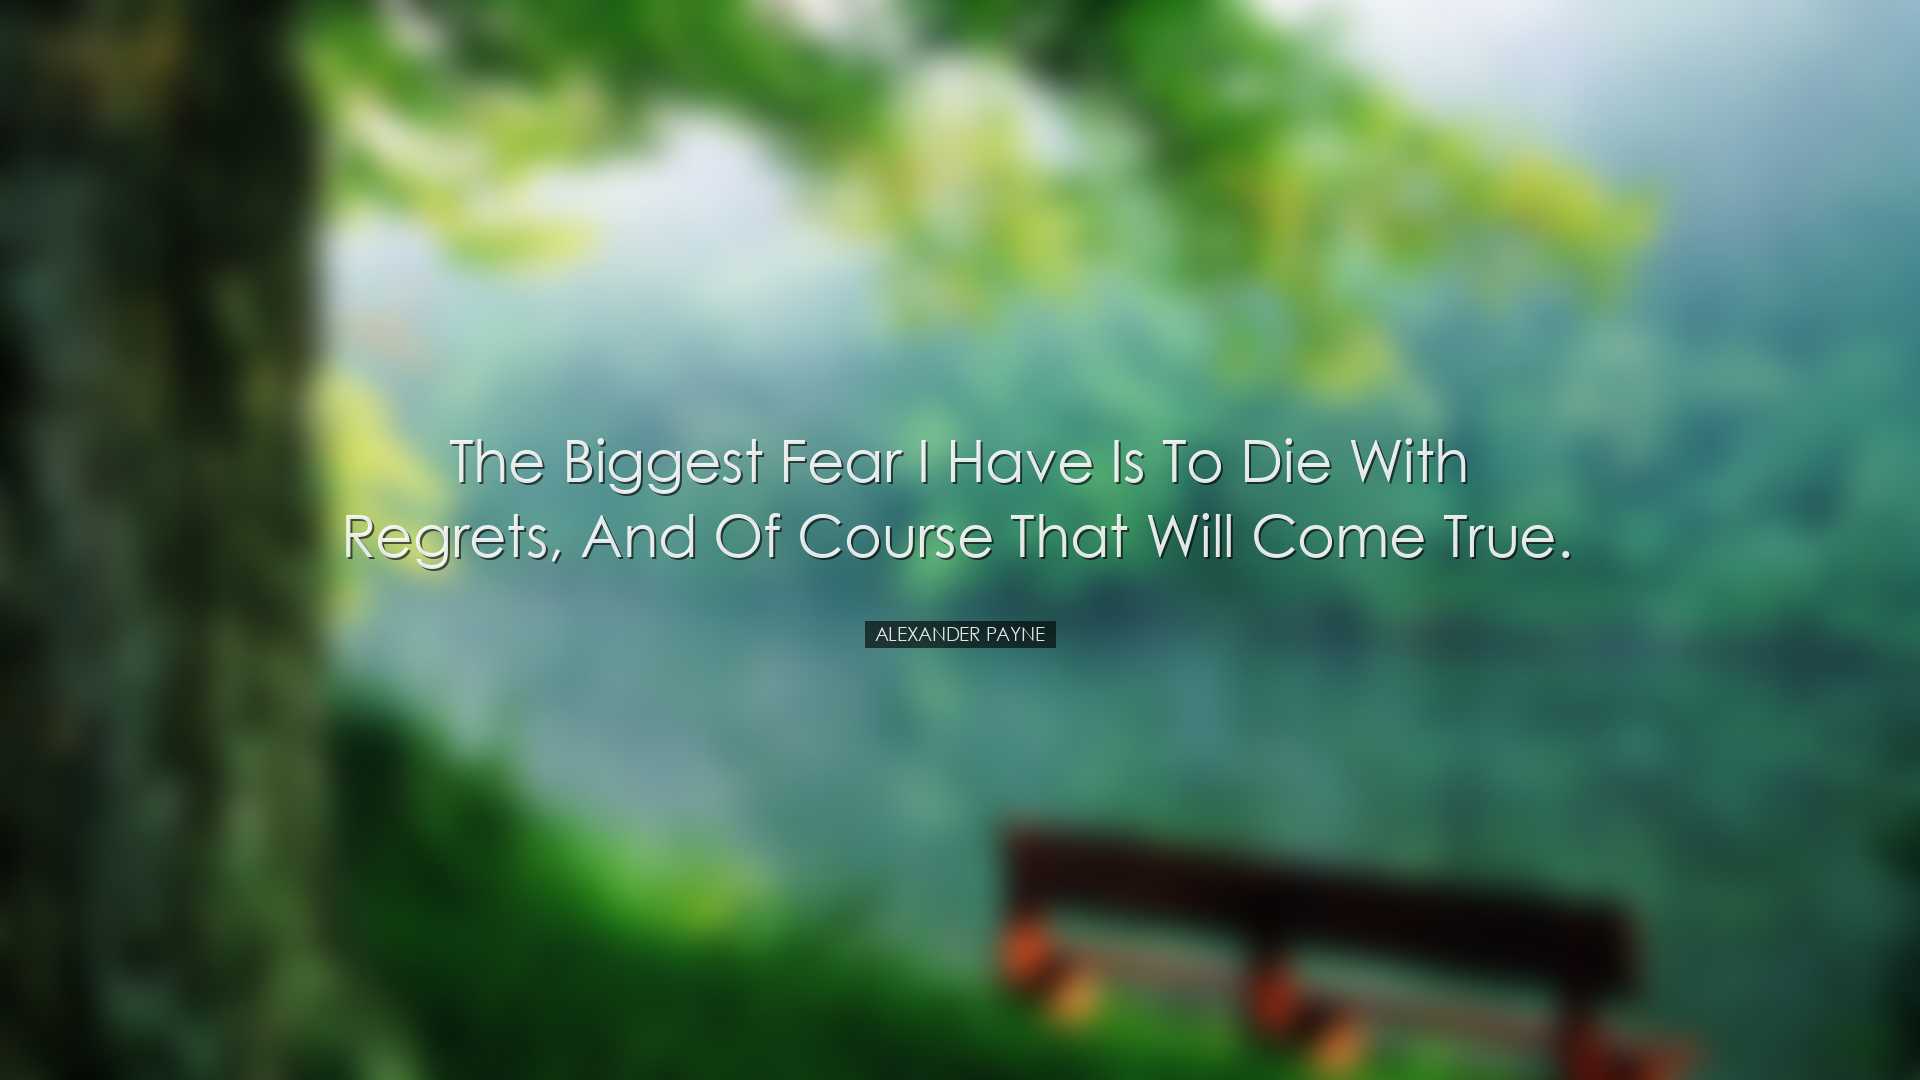 The biggest fear I have is to die with regrets, and of course that